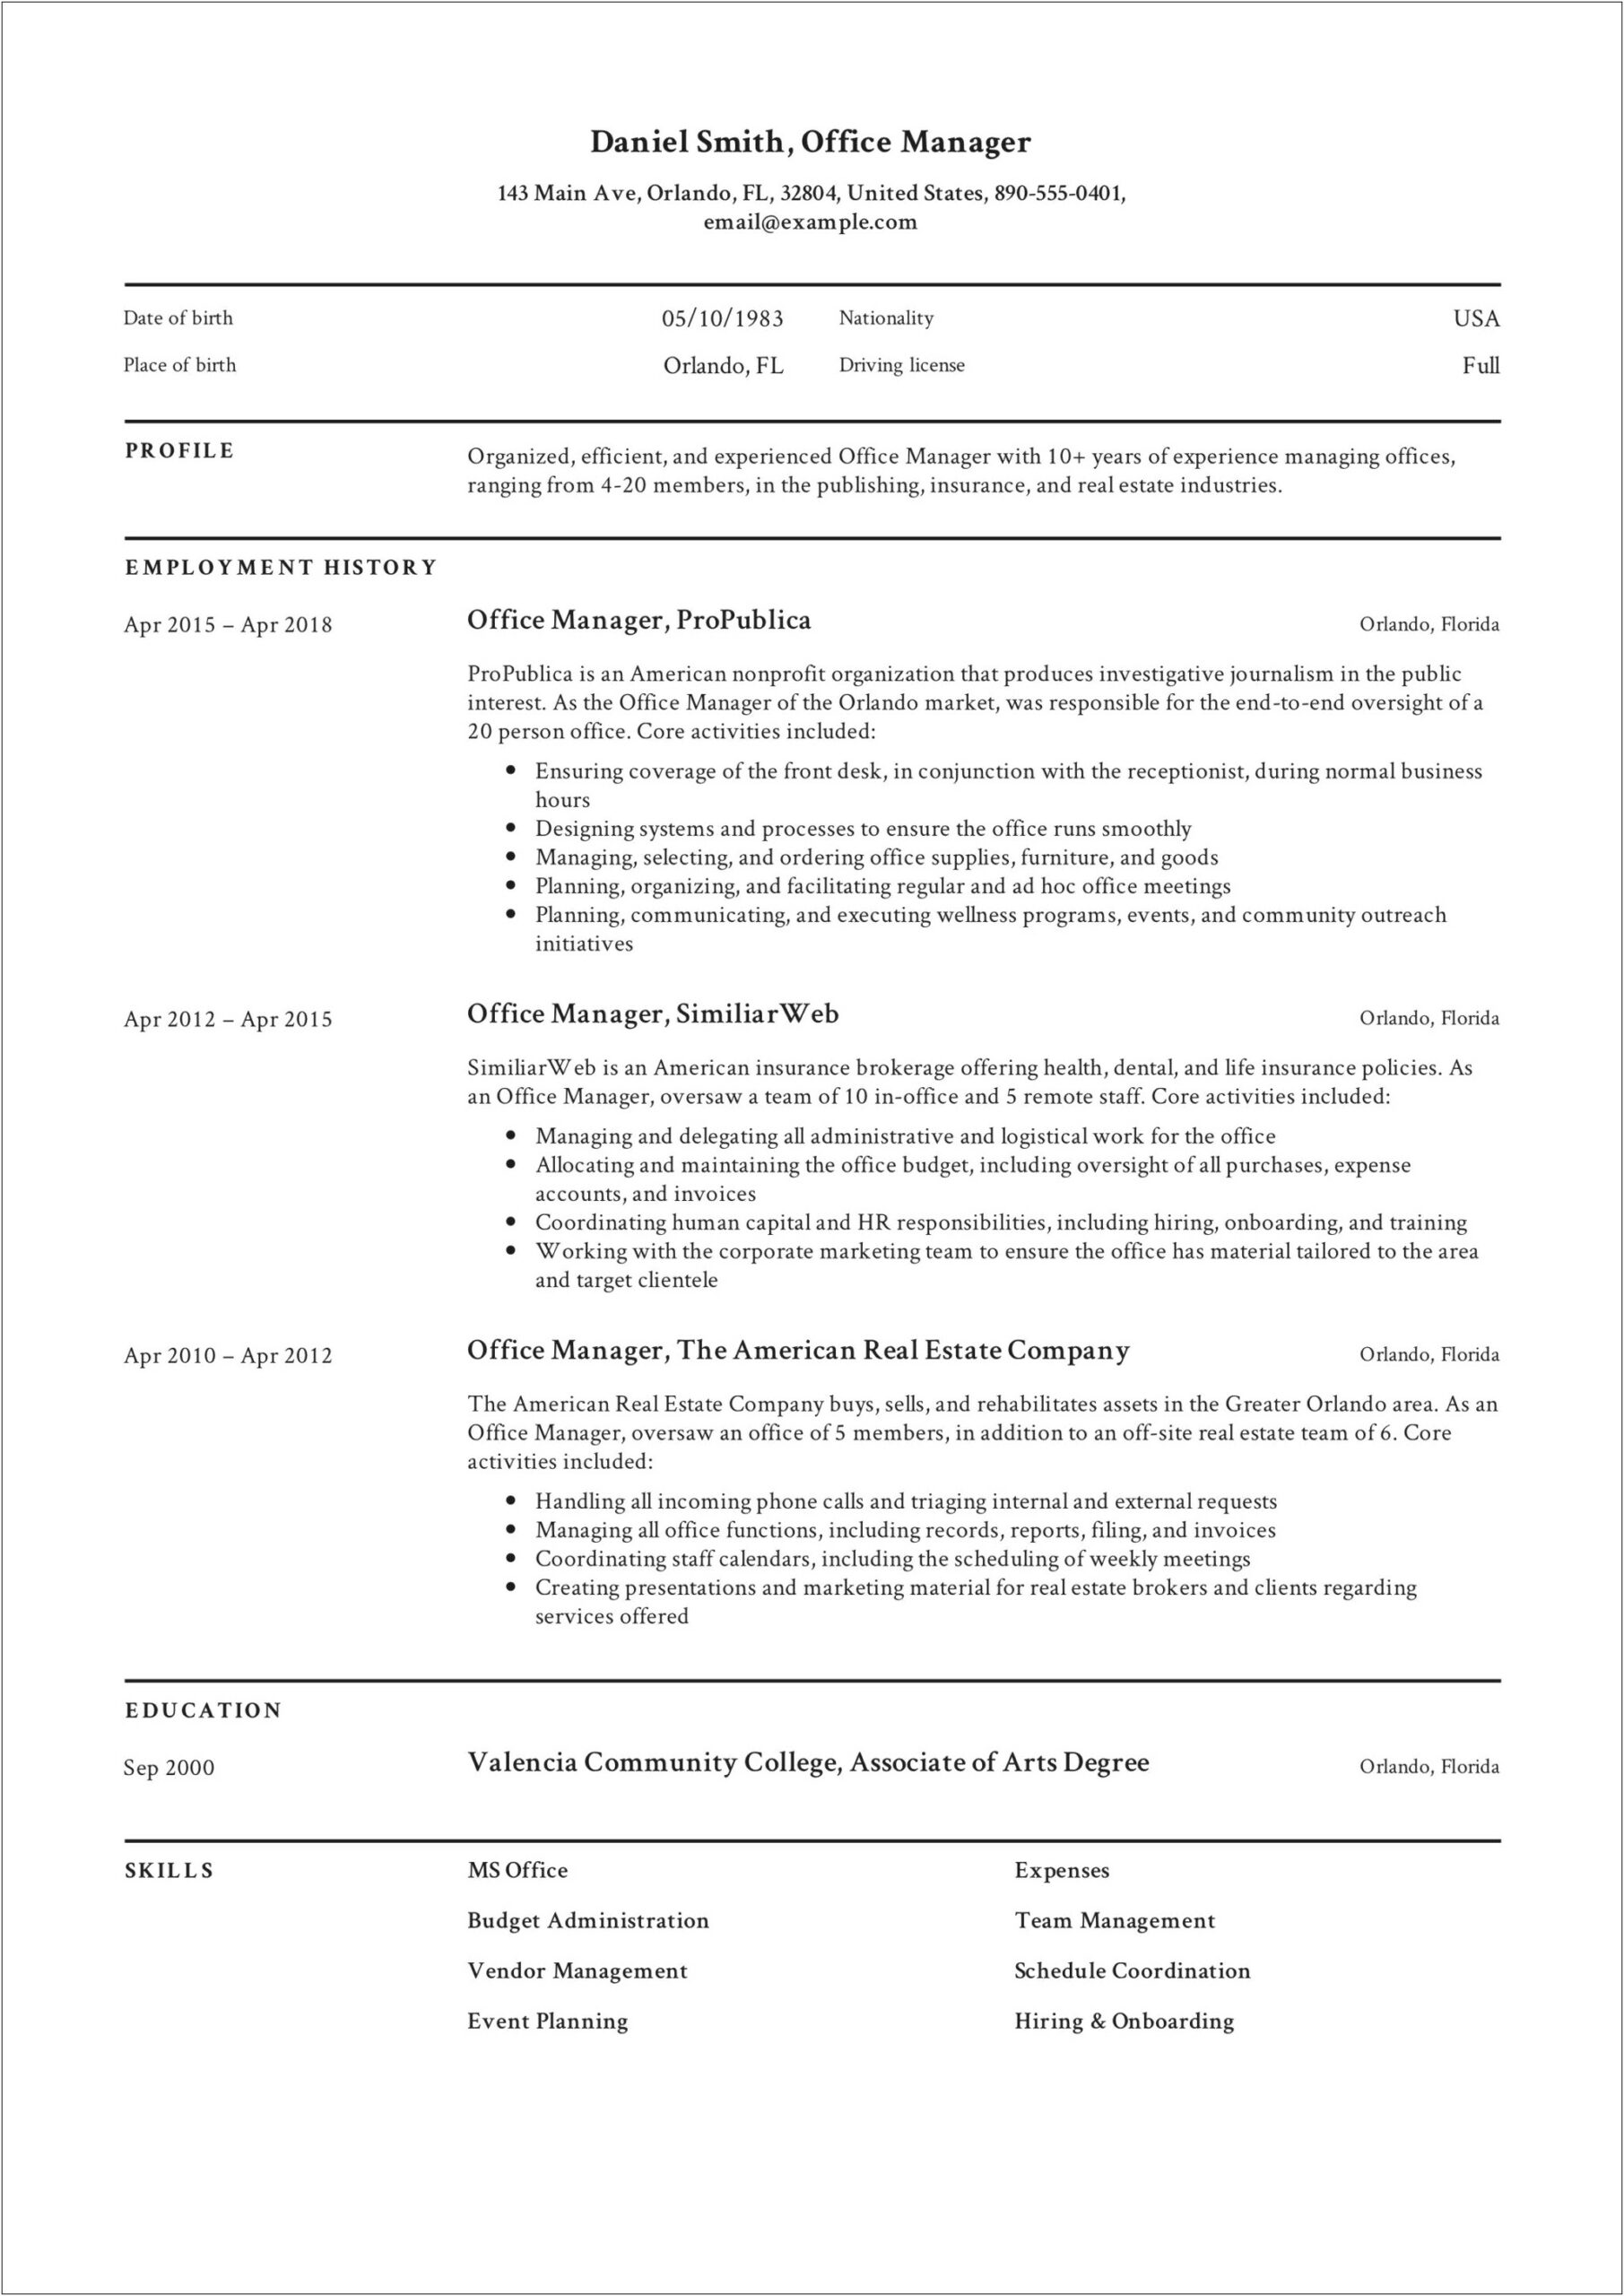 Resume Verbiage For Office Manager